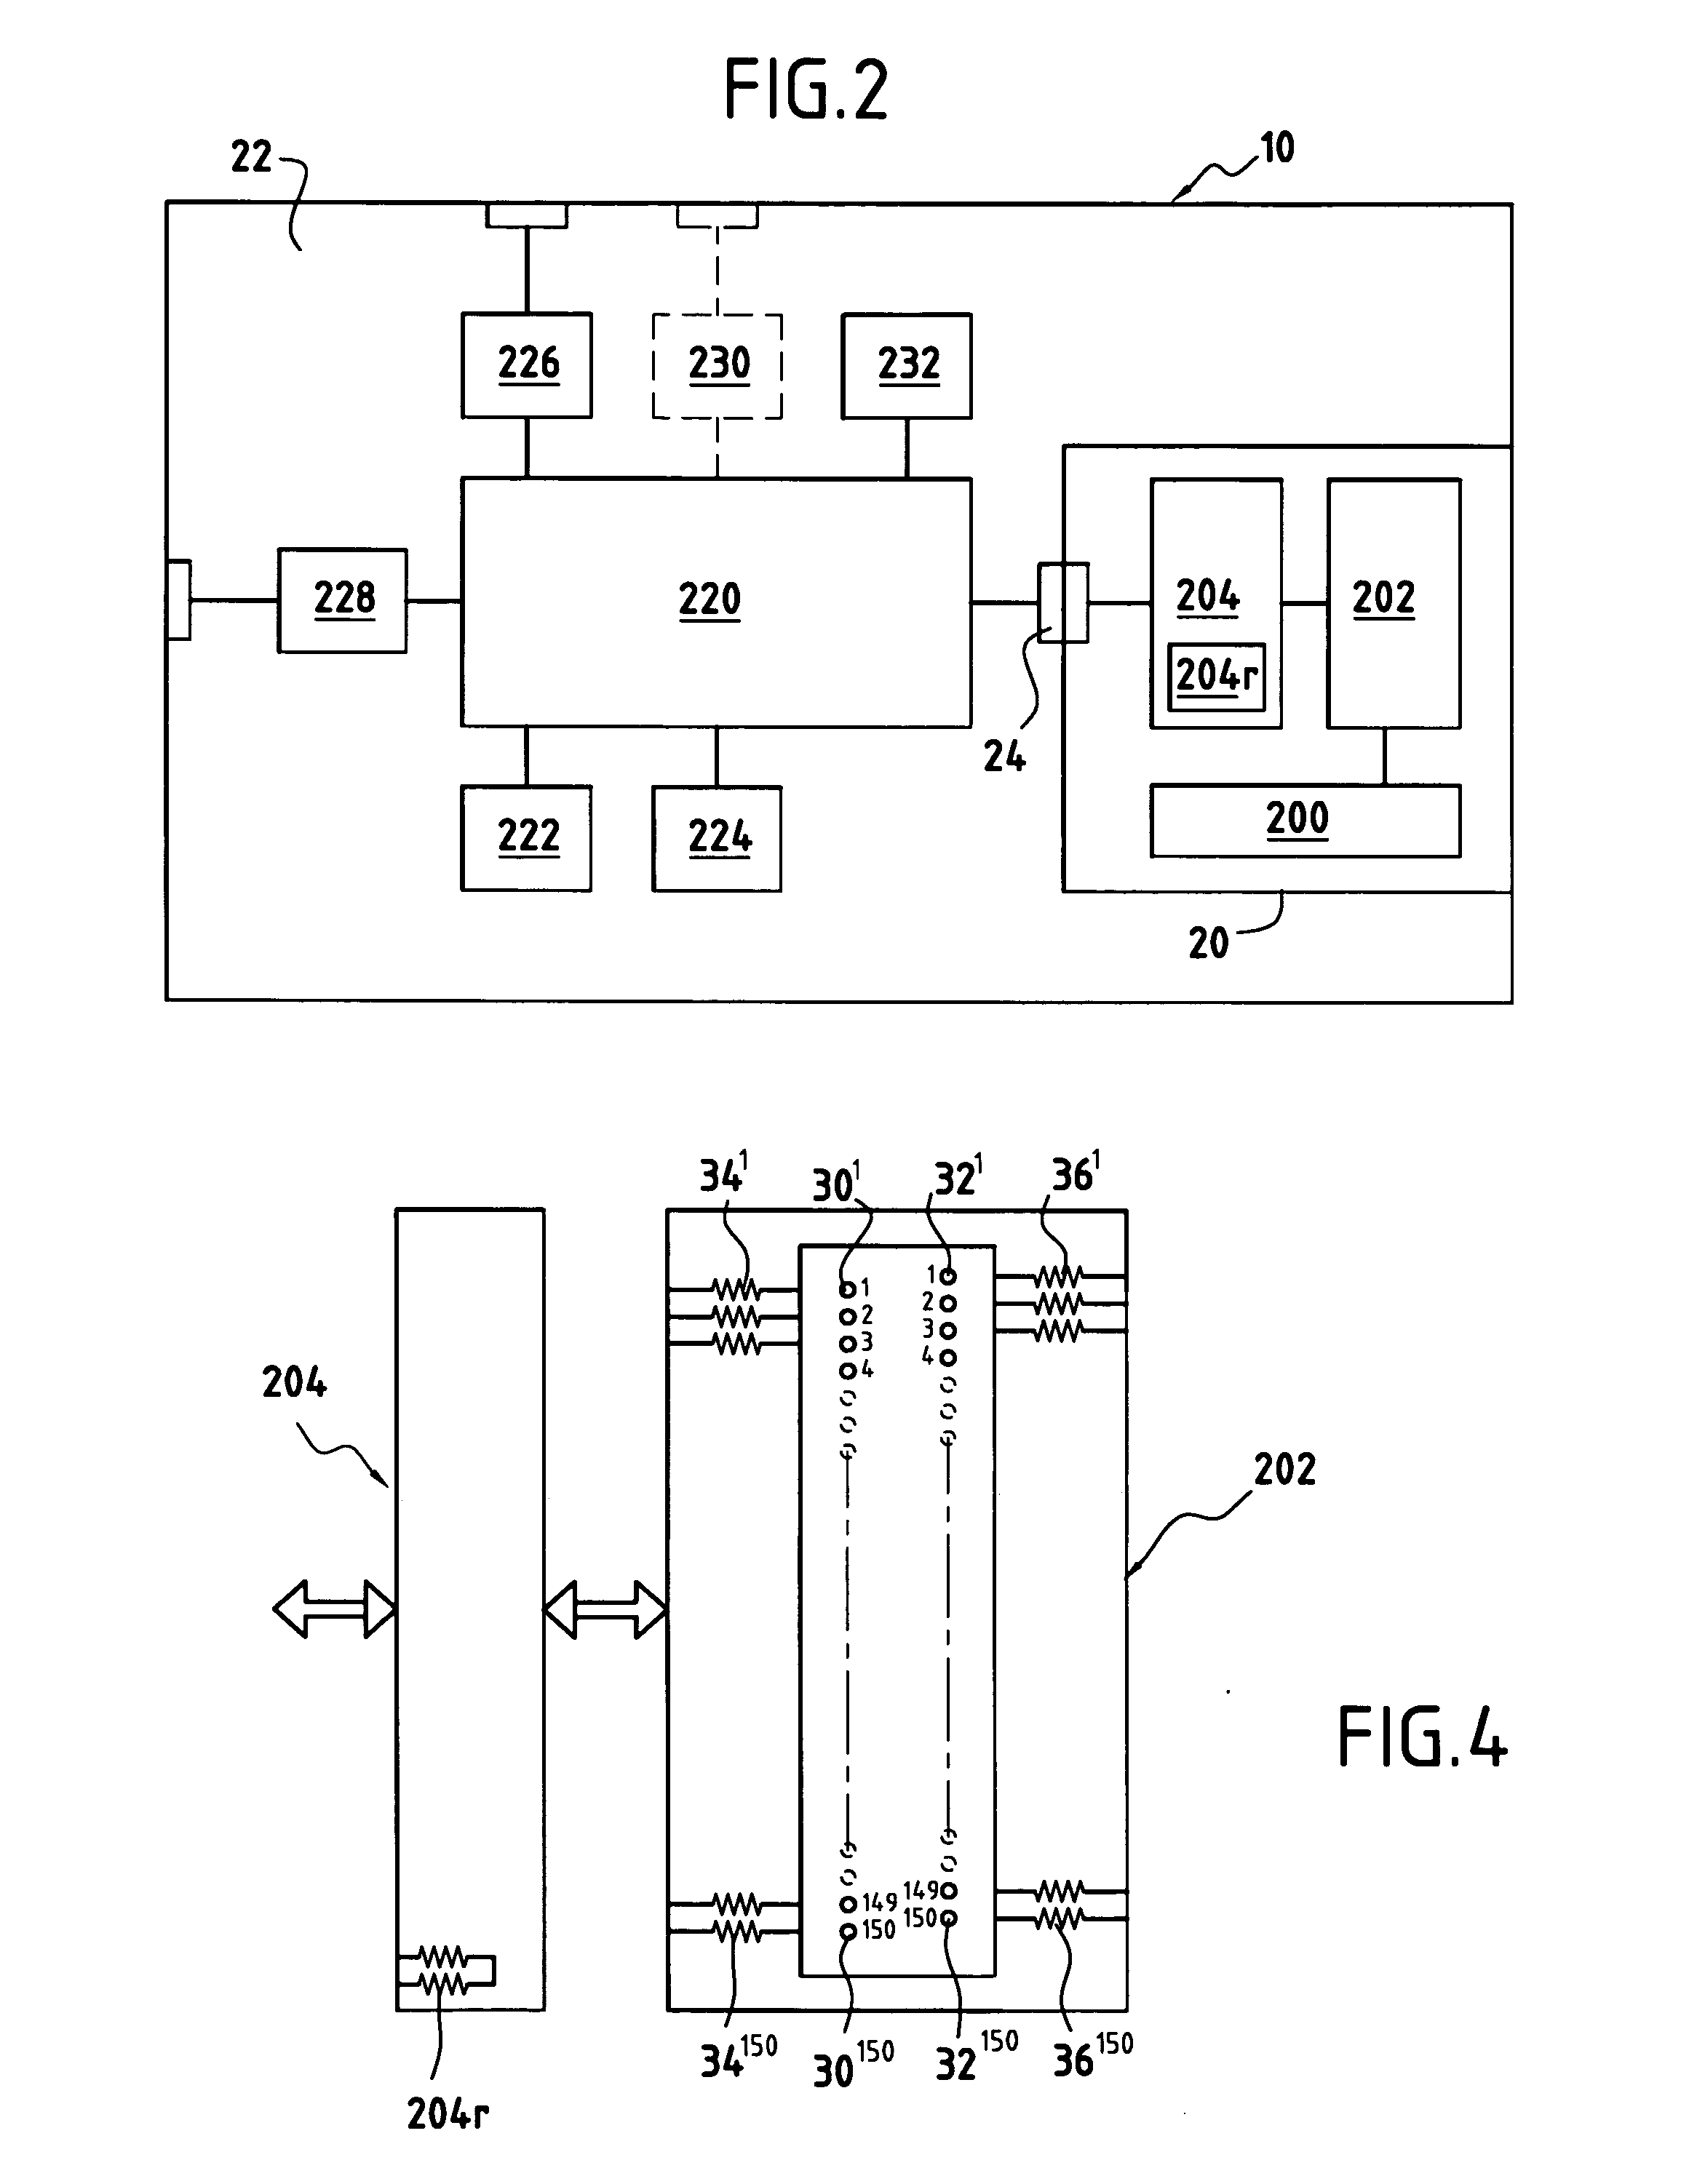 Postage meter system having a controlled level of ink